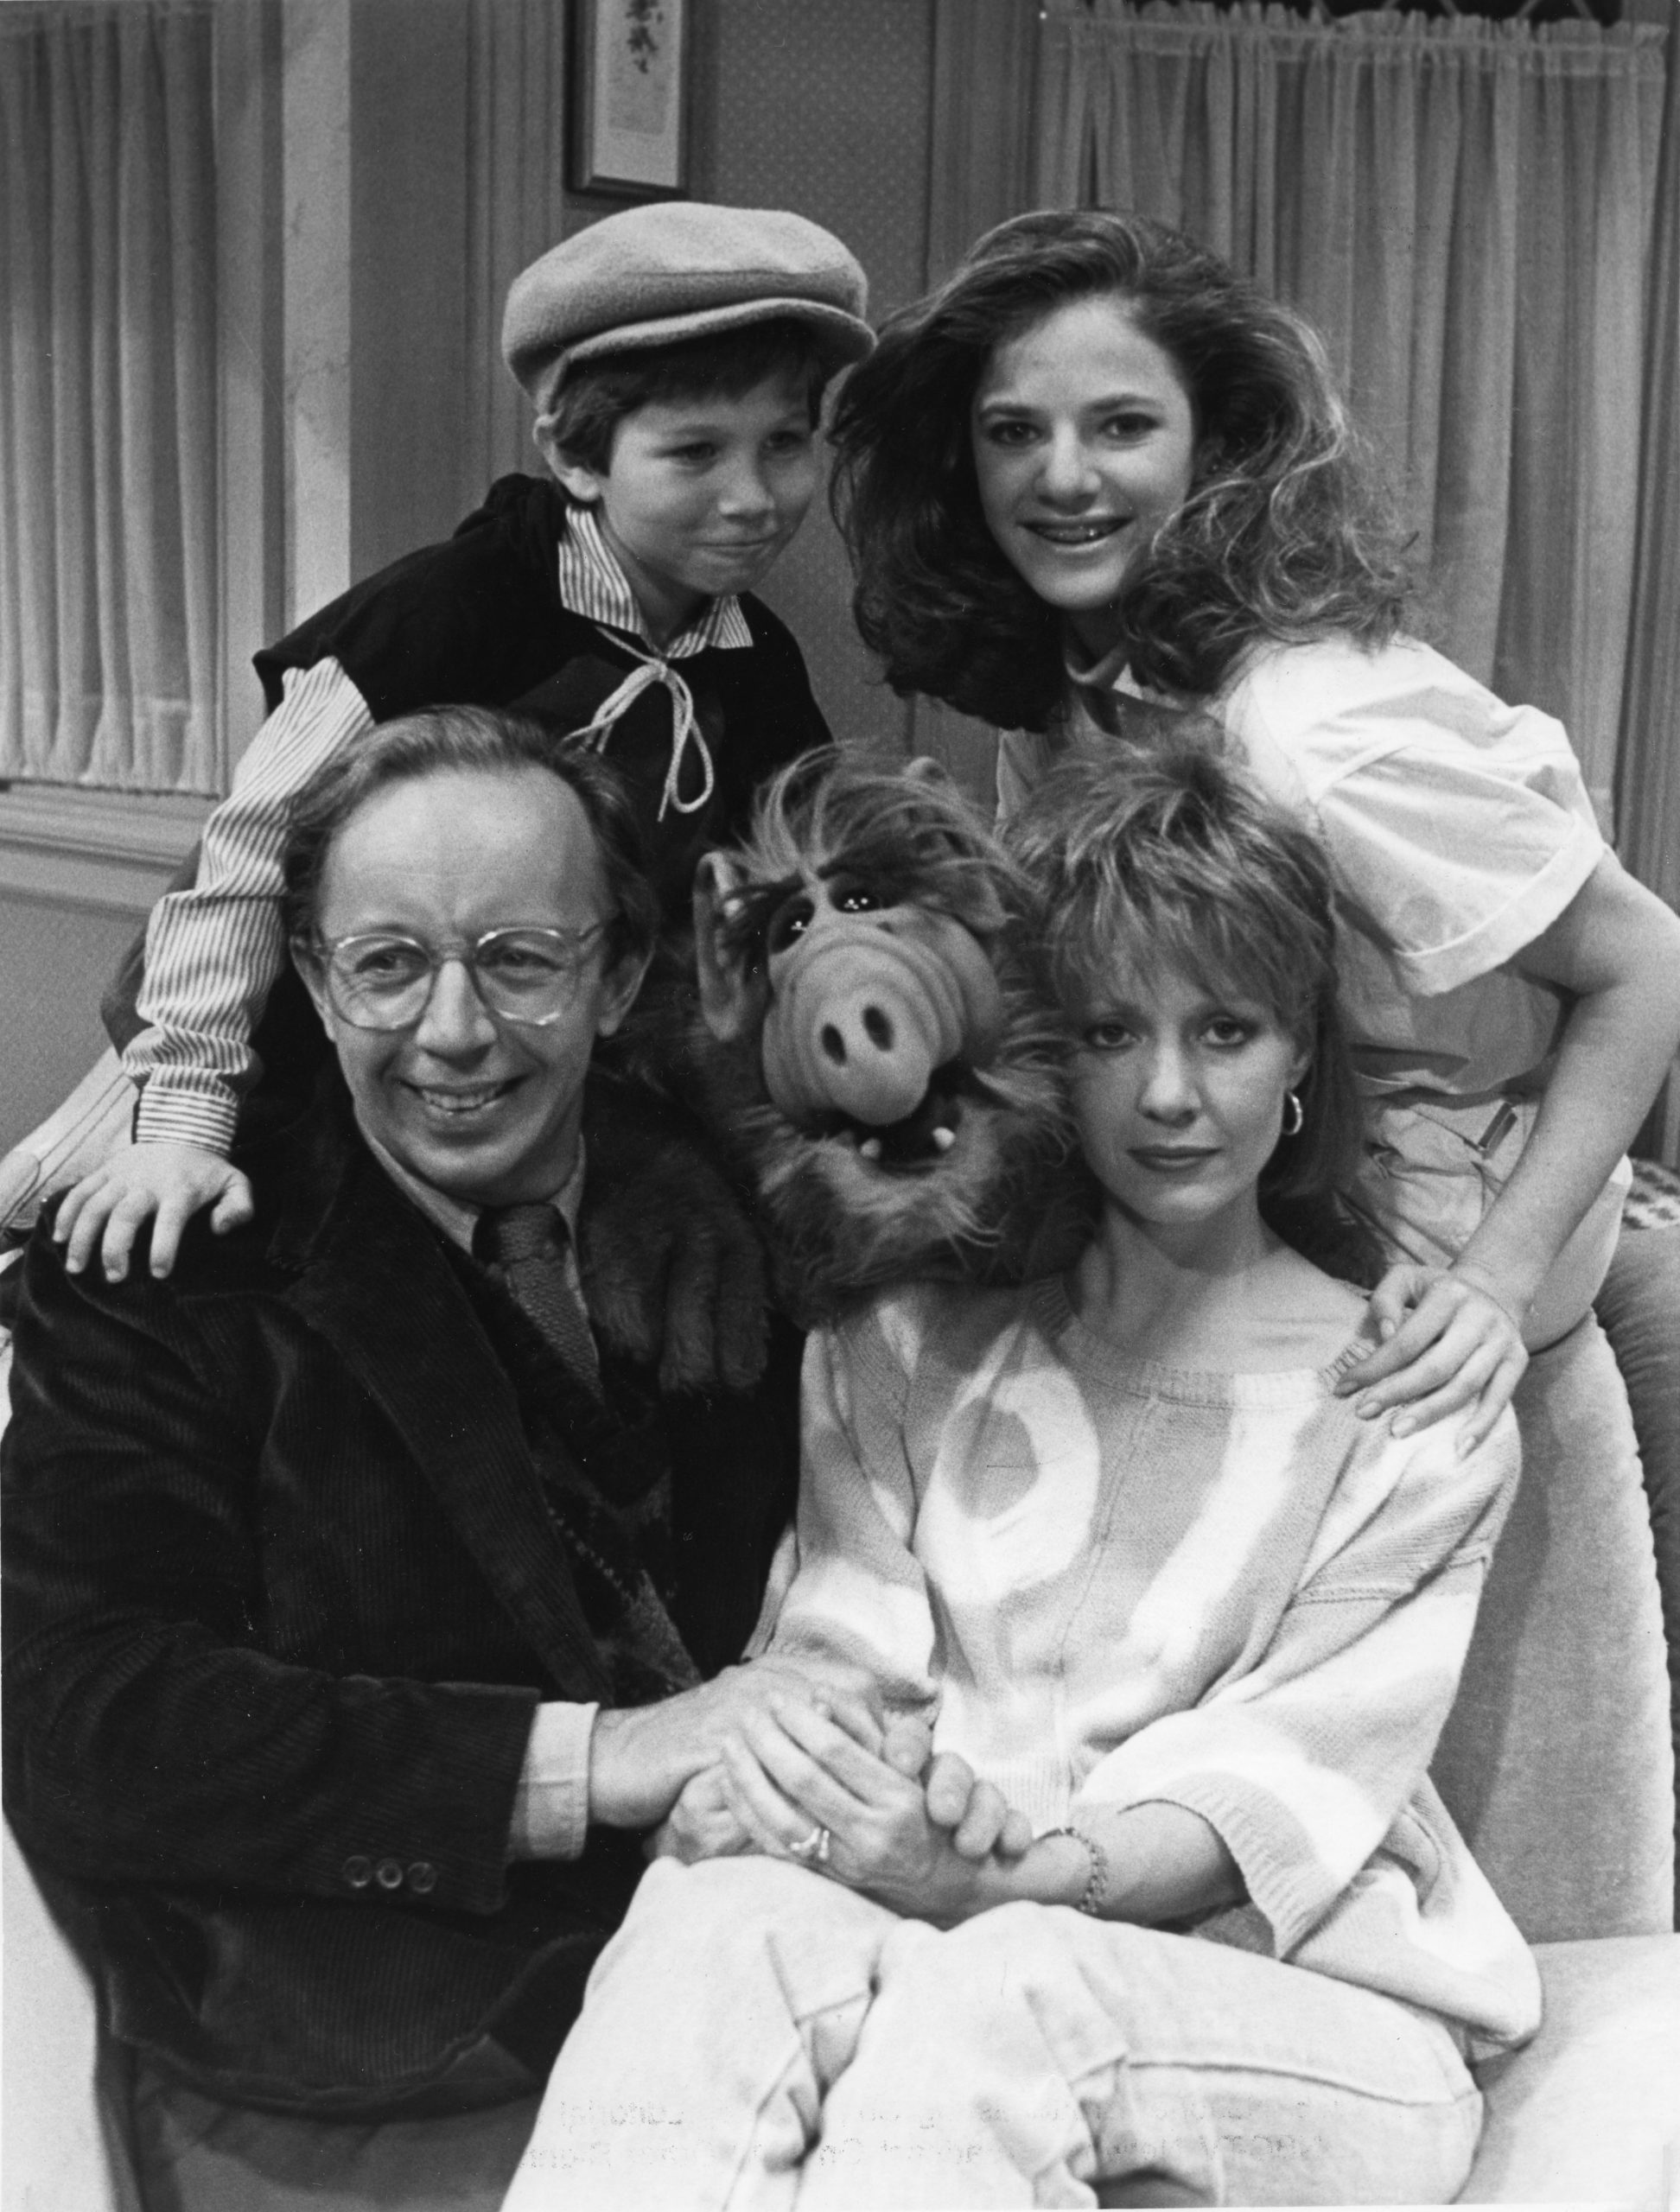 (L-R) Max Wright, Benji Gregory, Andrea Elson, and Anne Shedeen with ALF aka Alien Life Form in still from the TV show "ALF" on May 23, 1986 in Los Angeles, California. (Photo by Michael Ochs Archives/Getty Images)